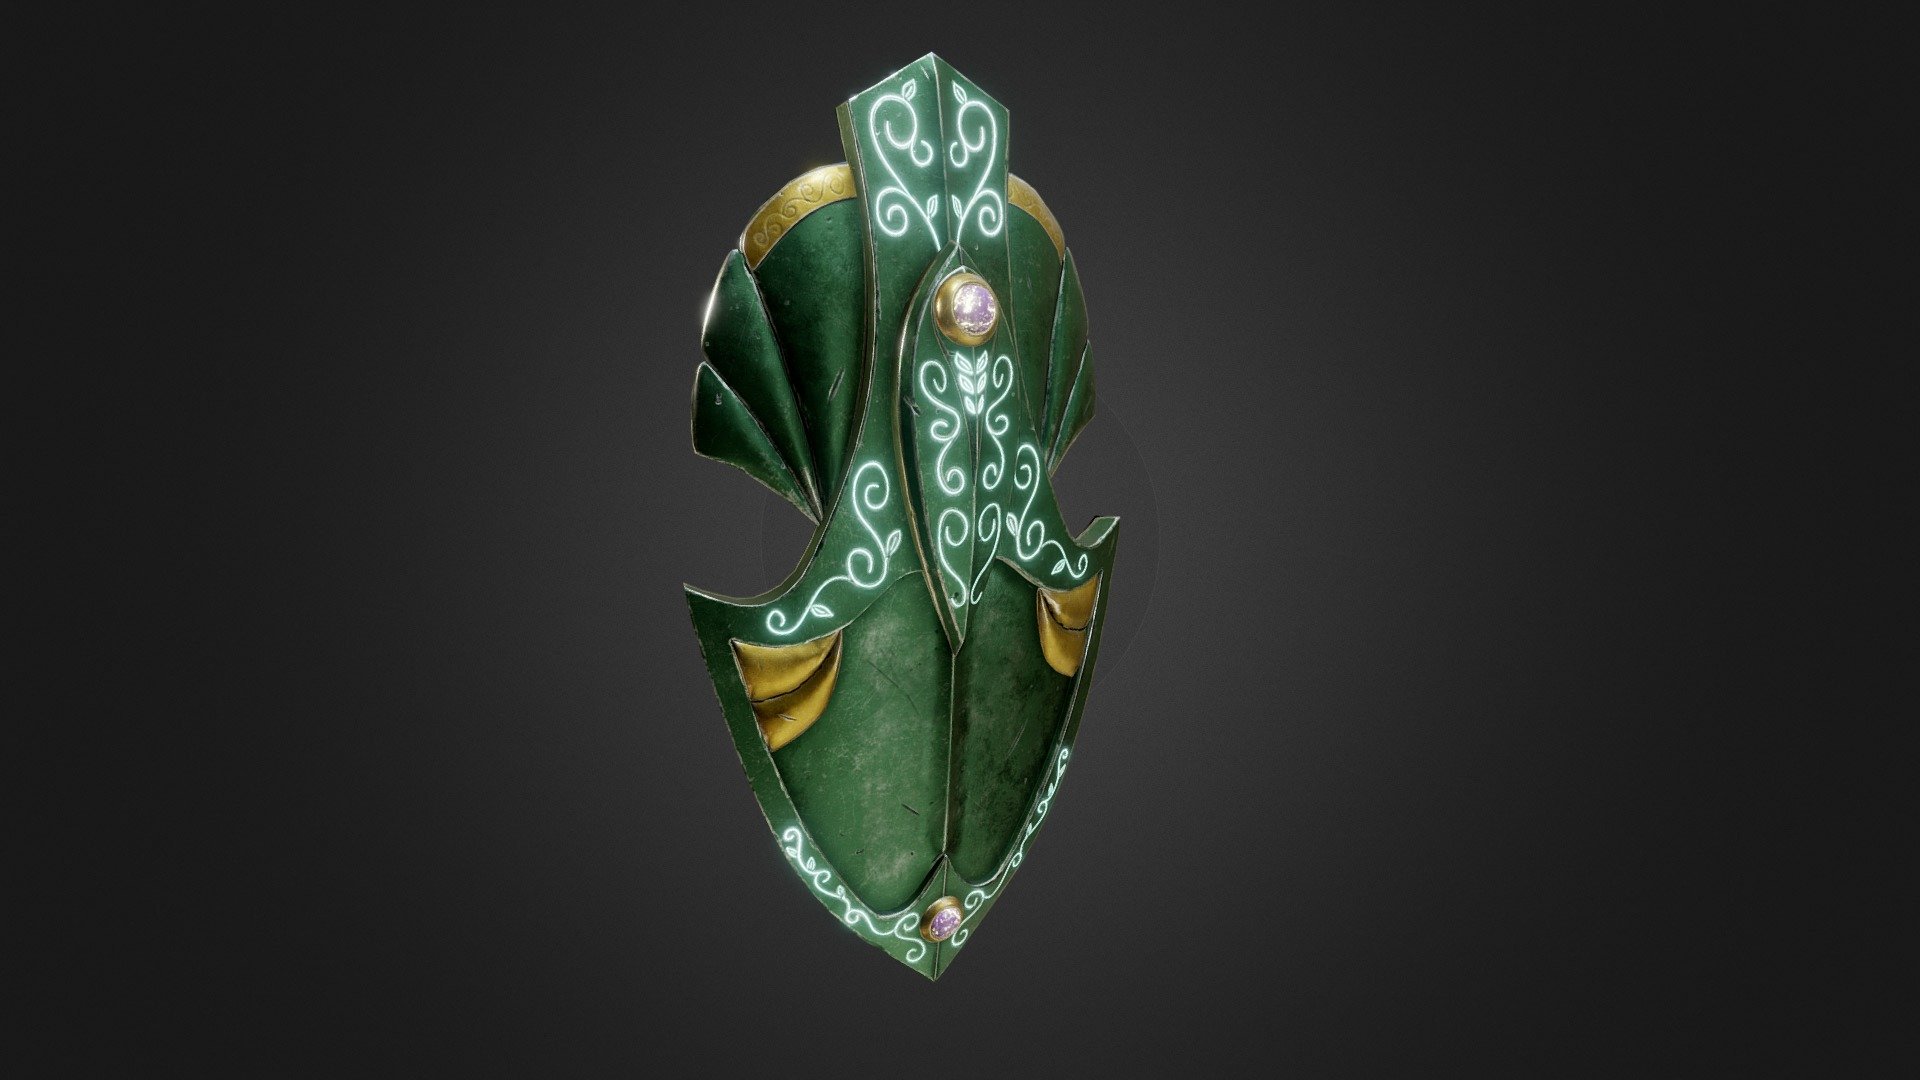 Fantasy Elvish Shield 3D model

••••••••••••

Game-ready PBR model of a fantasy elvish shield for your project. Modeled in Maya and ZBrush, textured in Substance Painter, rendered in Marmoset Toolbag.

The model has 4K maps for both PBR workflows: Metal/Roughness and Specular/Glossiness. High quality photorealistic textures. All parts are nice organized and named properly.

••••••••••••

Available formats: .FBX | .OBJ | .MA/.MB (Maya 2018) | .MAX (2017) | .3DS

••••••••••••

Included textures (4K, PNG, 16-bit): Base Color | Diffuse | Normal Map DirecX | Normal Map OpenGL | Gloss | Specular | Roughness | Metallic | AO | Emissive

••••••••••••

Available by additional request: Marmoset Render Scene | Substance Painter project | ZBrush Tool

•••••••••••• - Fantasy Elvish Shield - Buy Royalty Free 3D model by bordiug 3d model